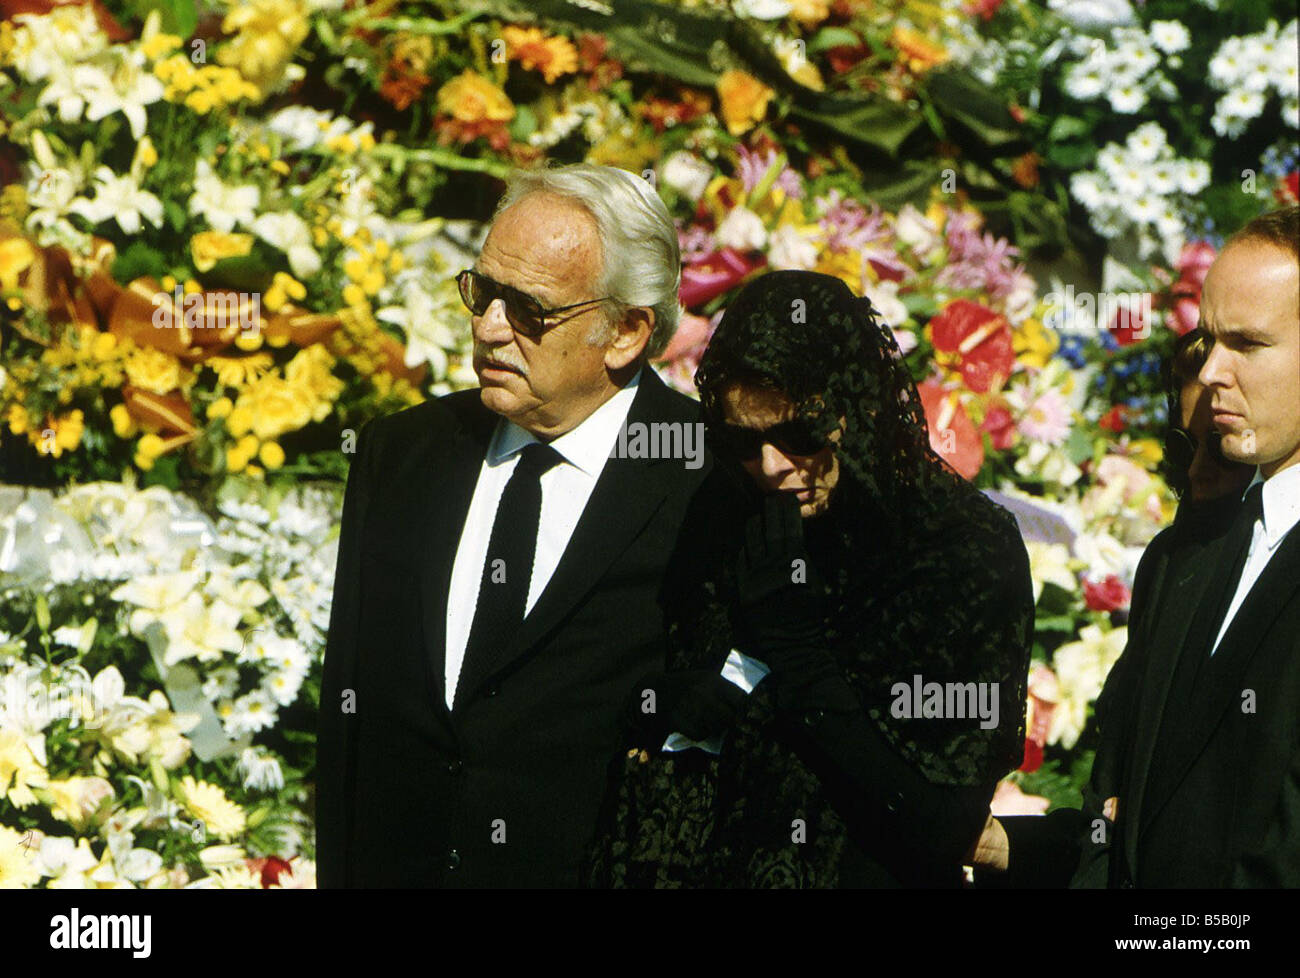 Prince Albert of Monaco with members of family at funeral of Stephanie s first husband Stefano Casiraghi Stock Photo